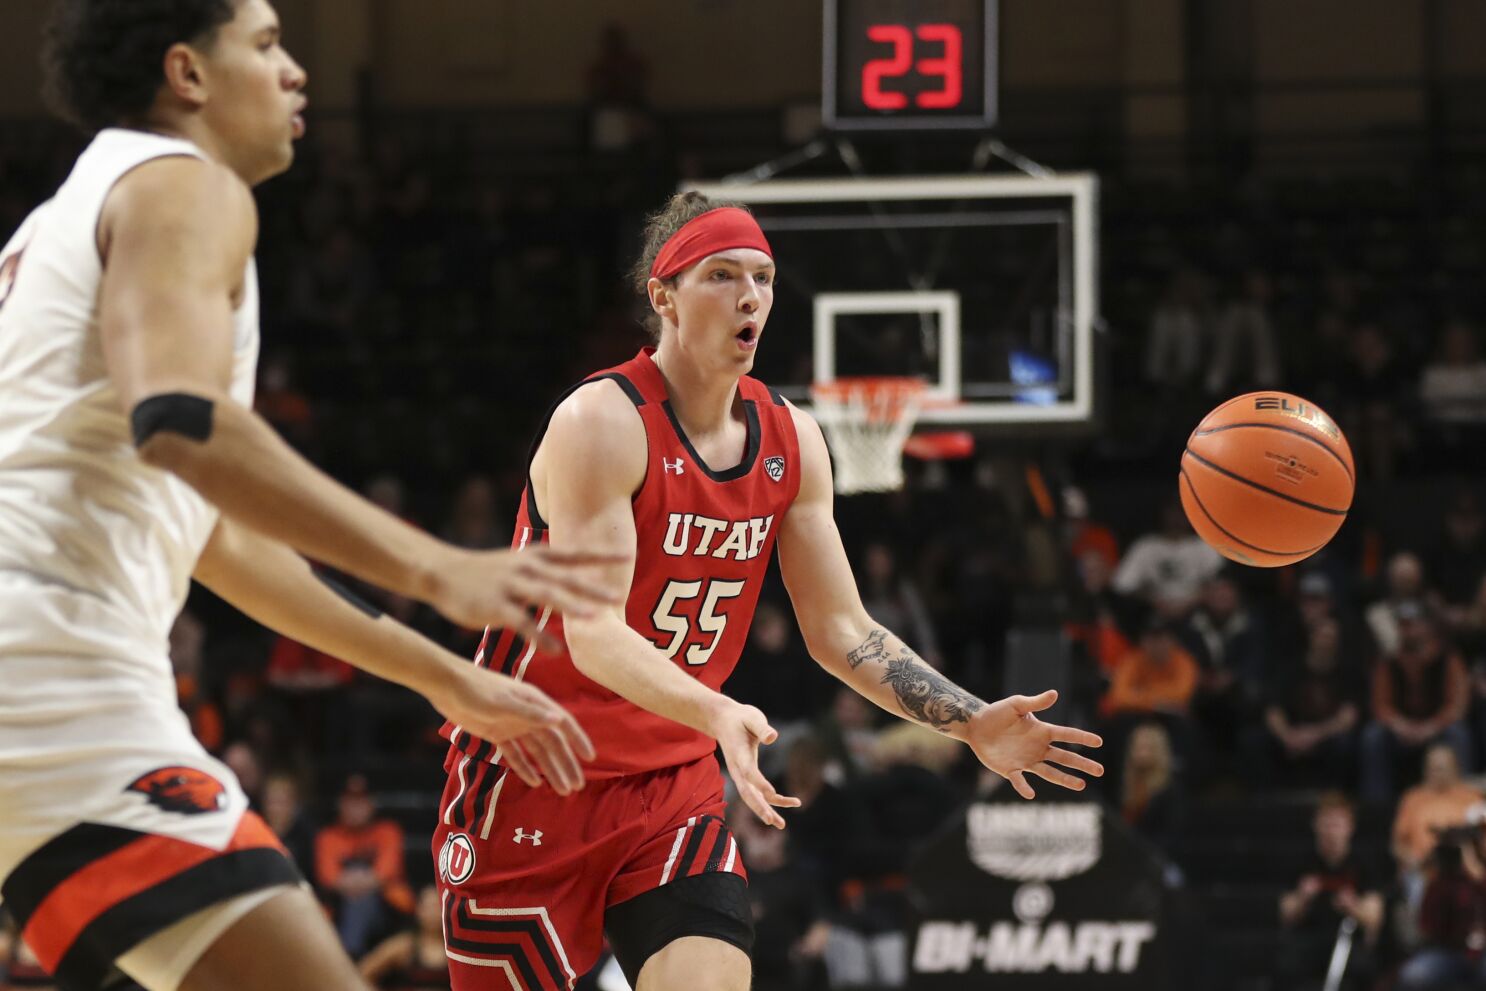 Utah Leads Wire-To-Wire In 63-44 Win Over Oregon State - The San Diego Union-Tribune